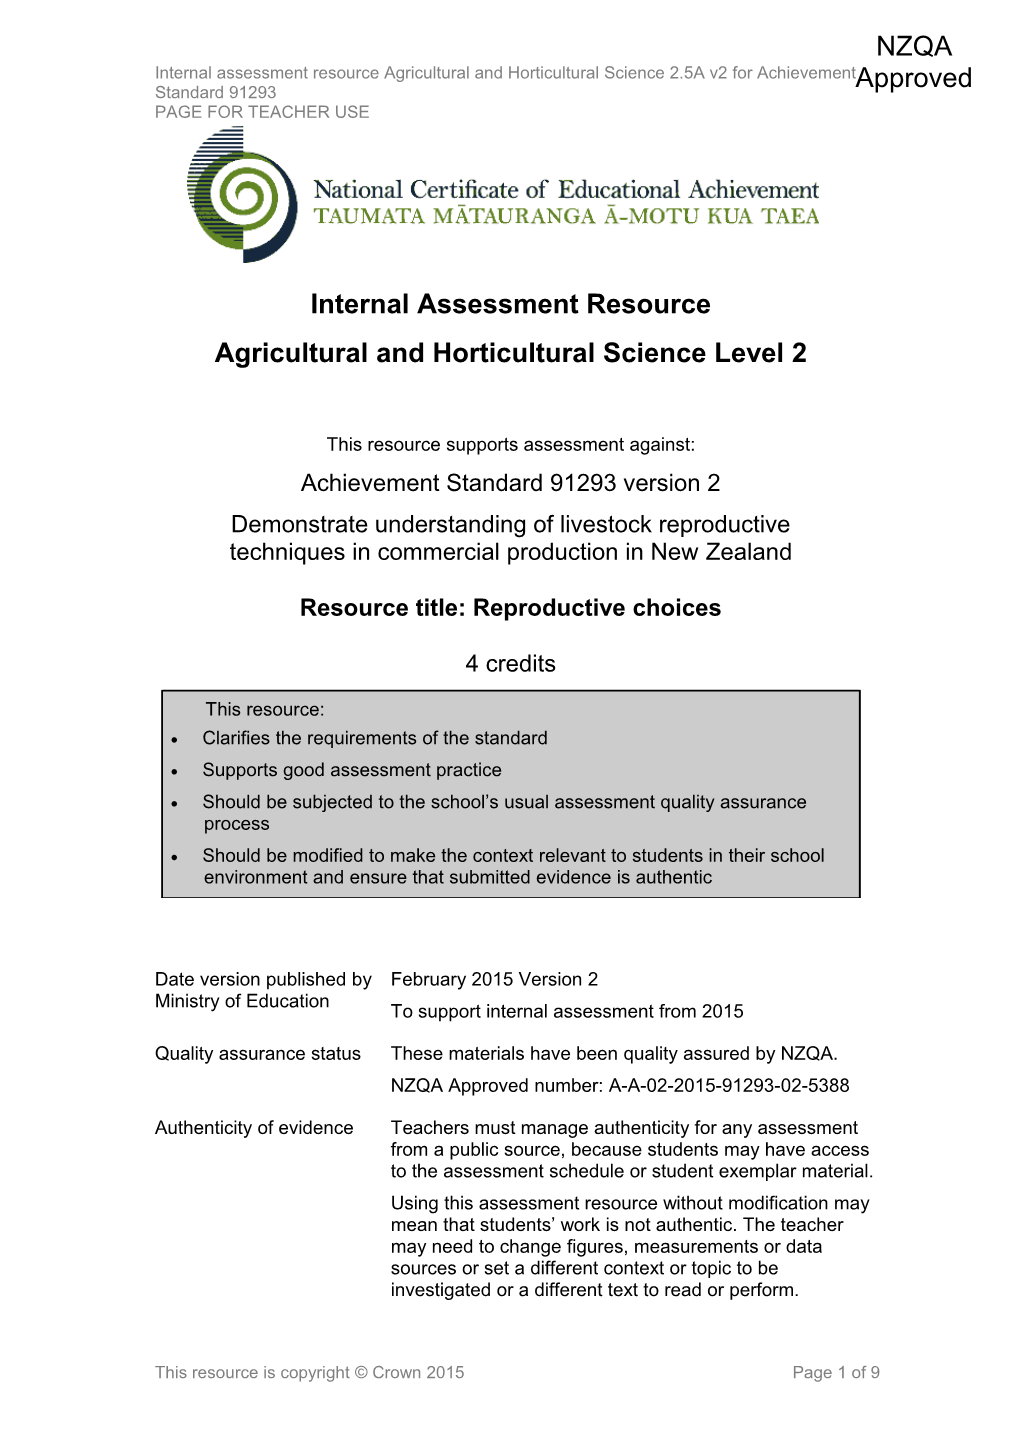 Level 2 Agricultural and Horticultural Science Internal Assessment Resource